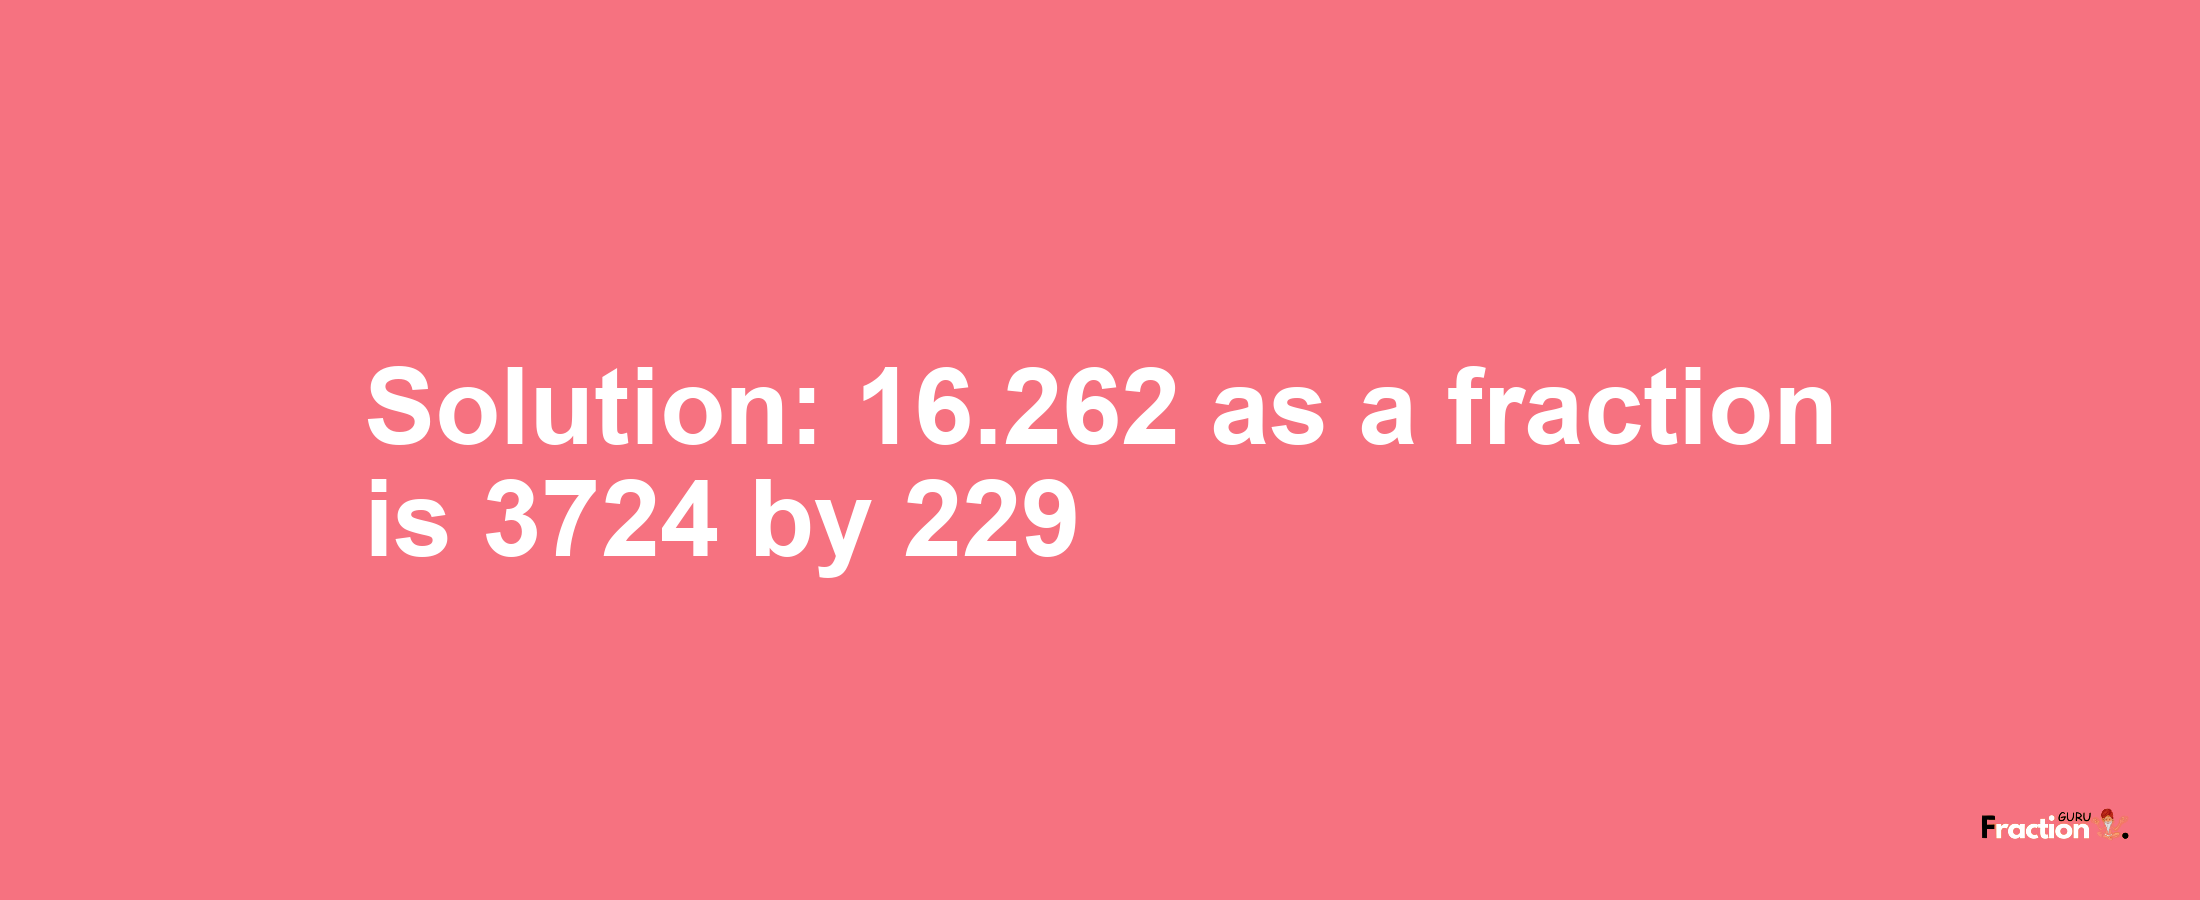 Solution:16.262 as a fraction is 3724/229